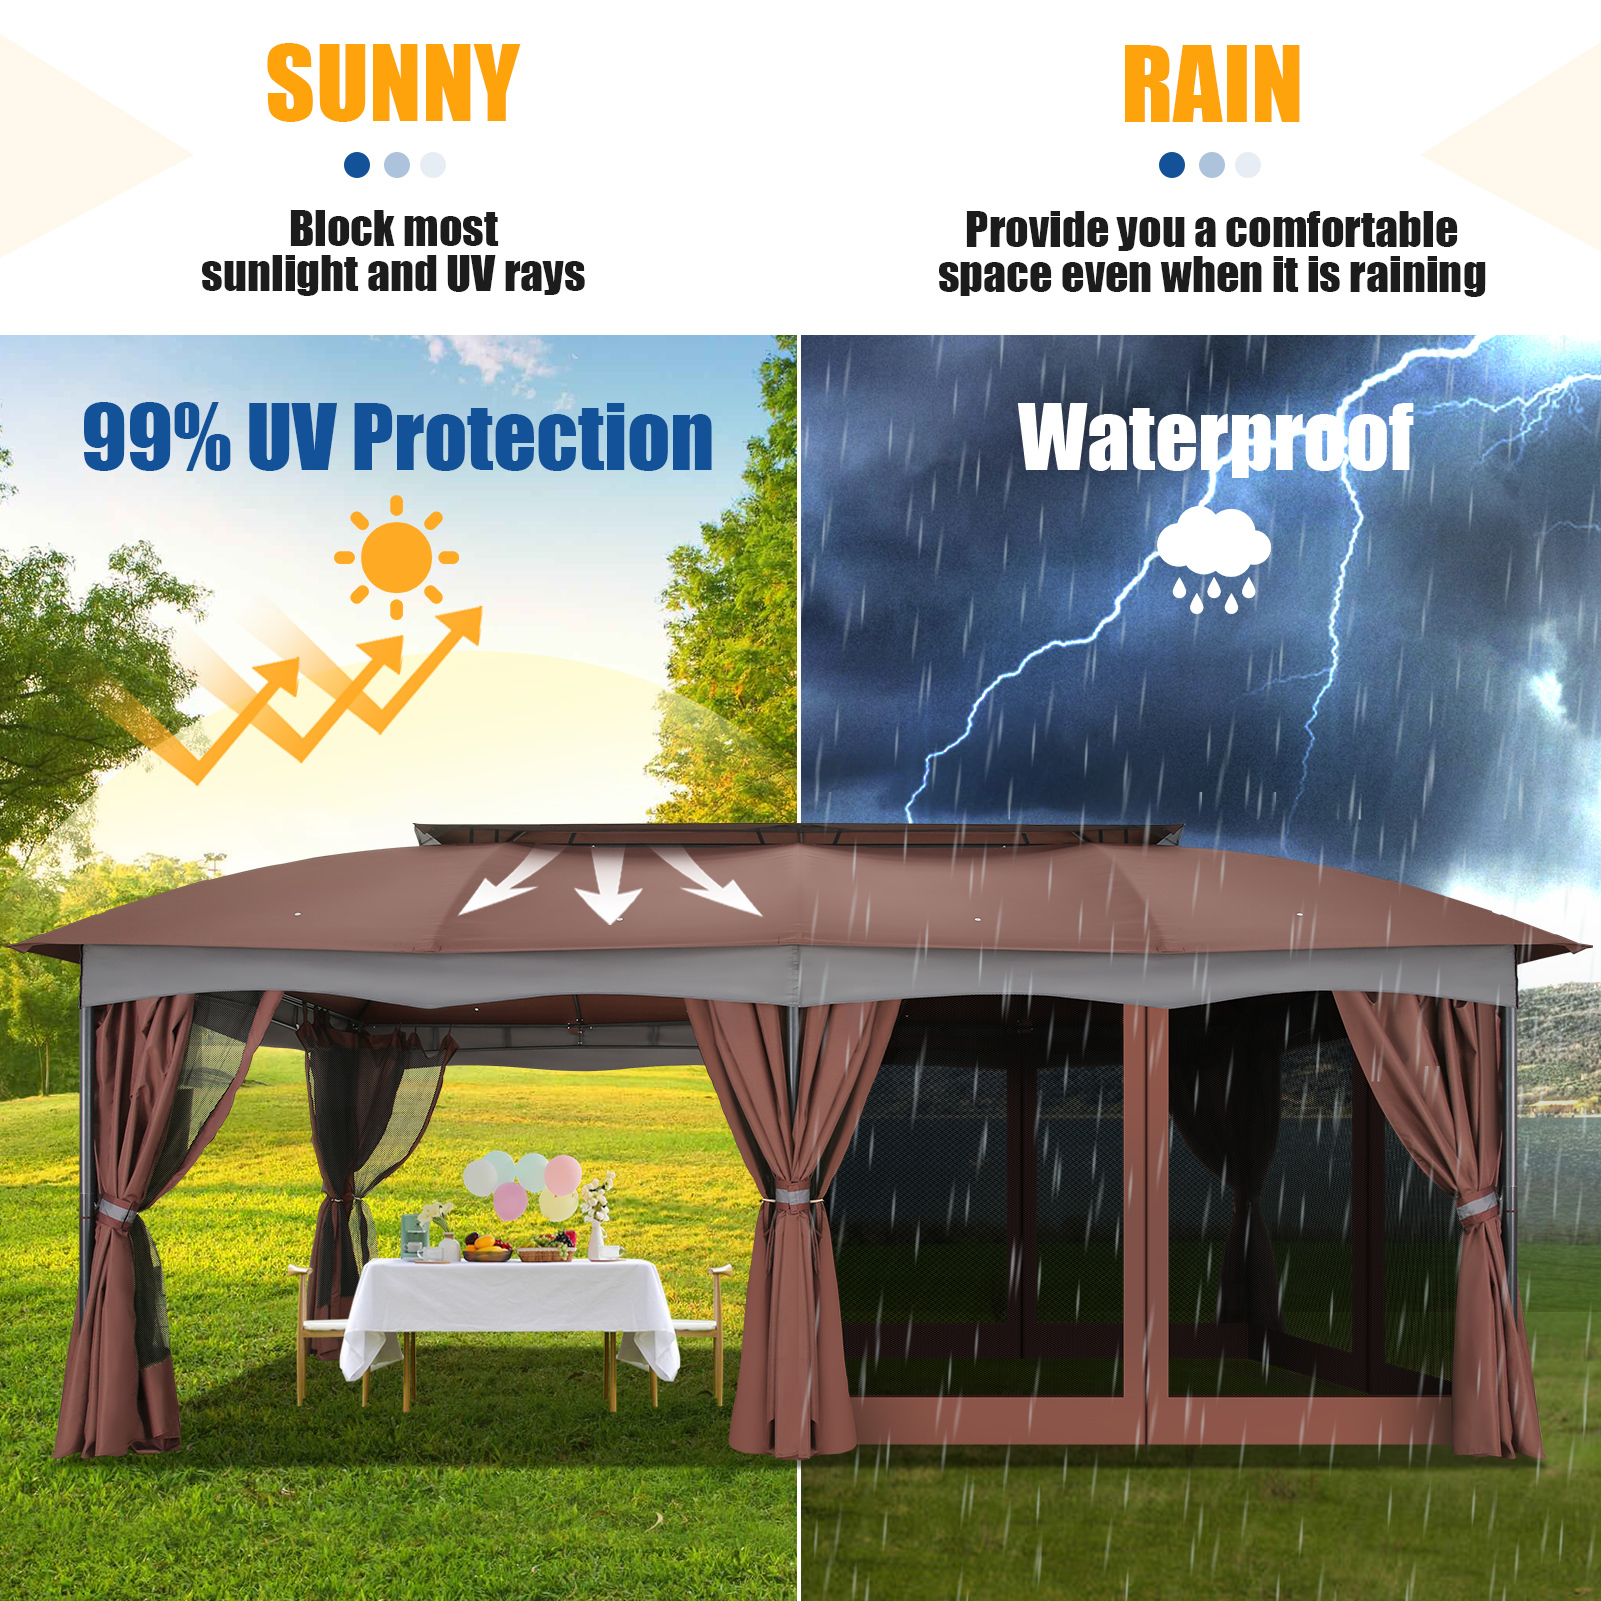 COBIZI 12X20 Heavy Duty Gazebo Outdoor Gazebo with Mosquito Netting and Curtains, Canopy Tent Deck Gazebo with Double-Arc Roof Ventiation and Metal Steel Frame Suitable for Lawn, Backyard, Patio - image 5 of 11